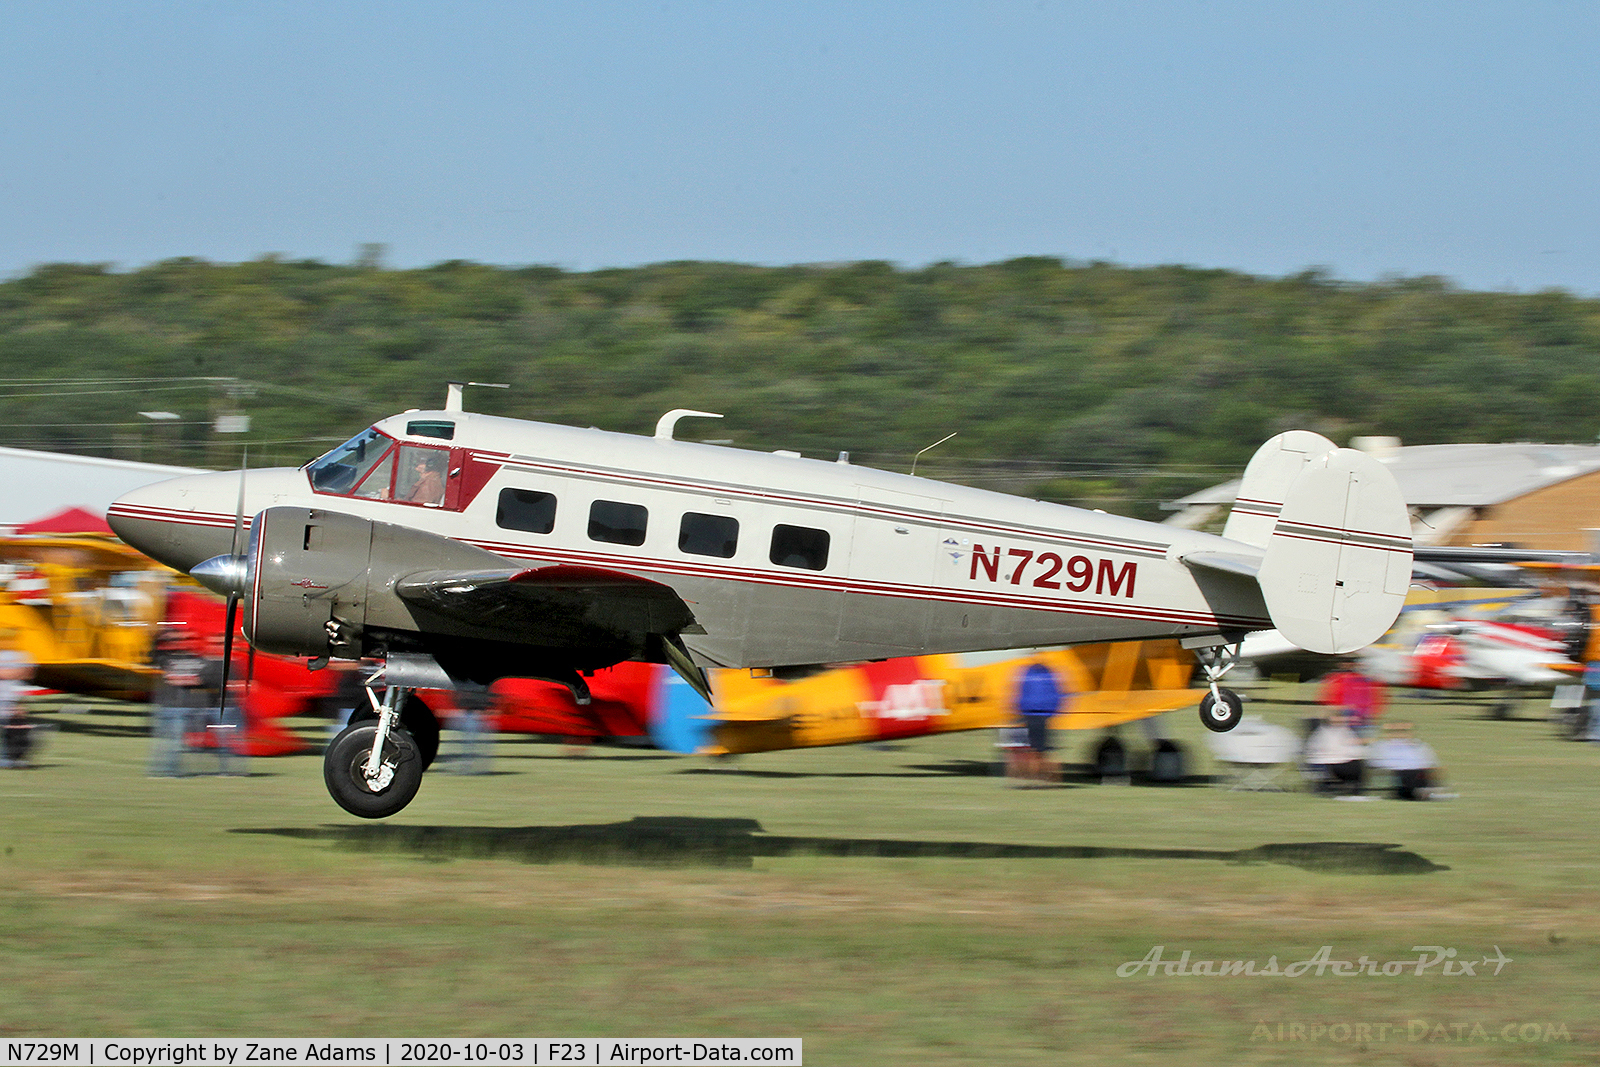 N729M, 1960 Beech G18S C/N BA-517, At the 2020 Ranger Airfield Fly-in